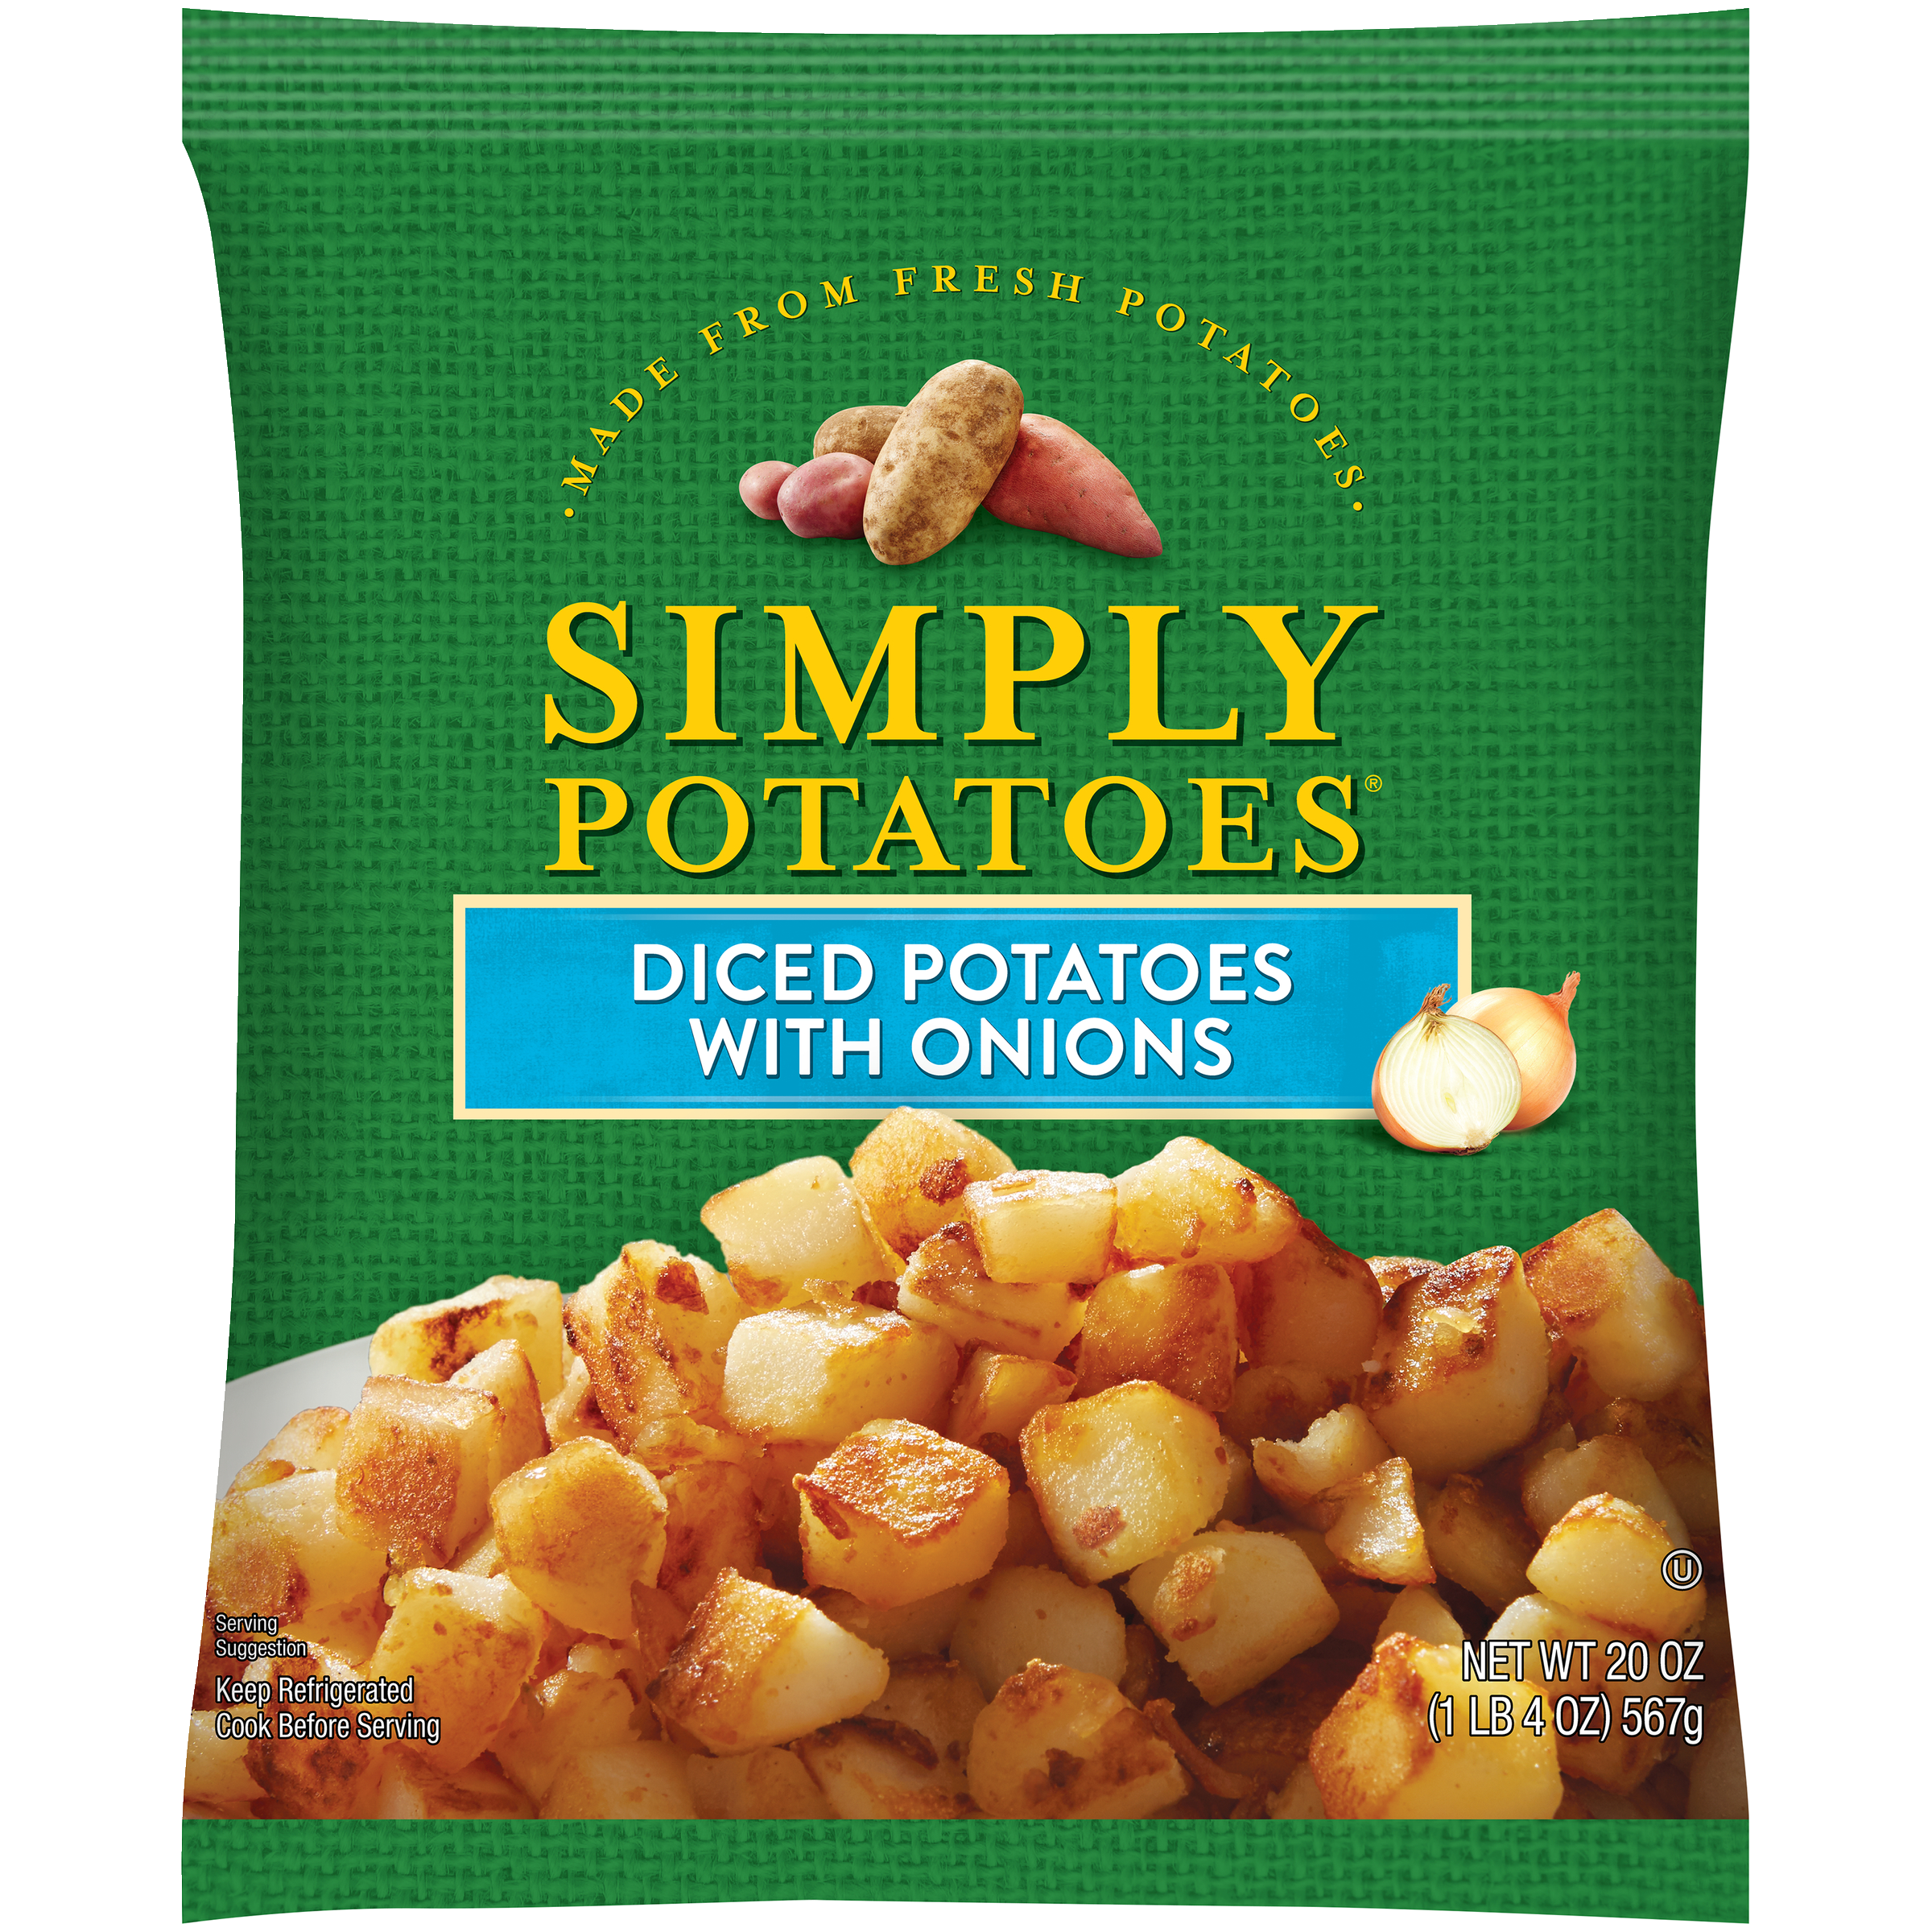 Simply Potatoes Diced Potatoes with Onions product image